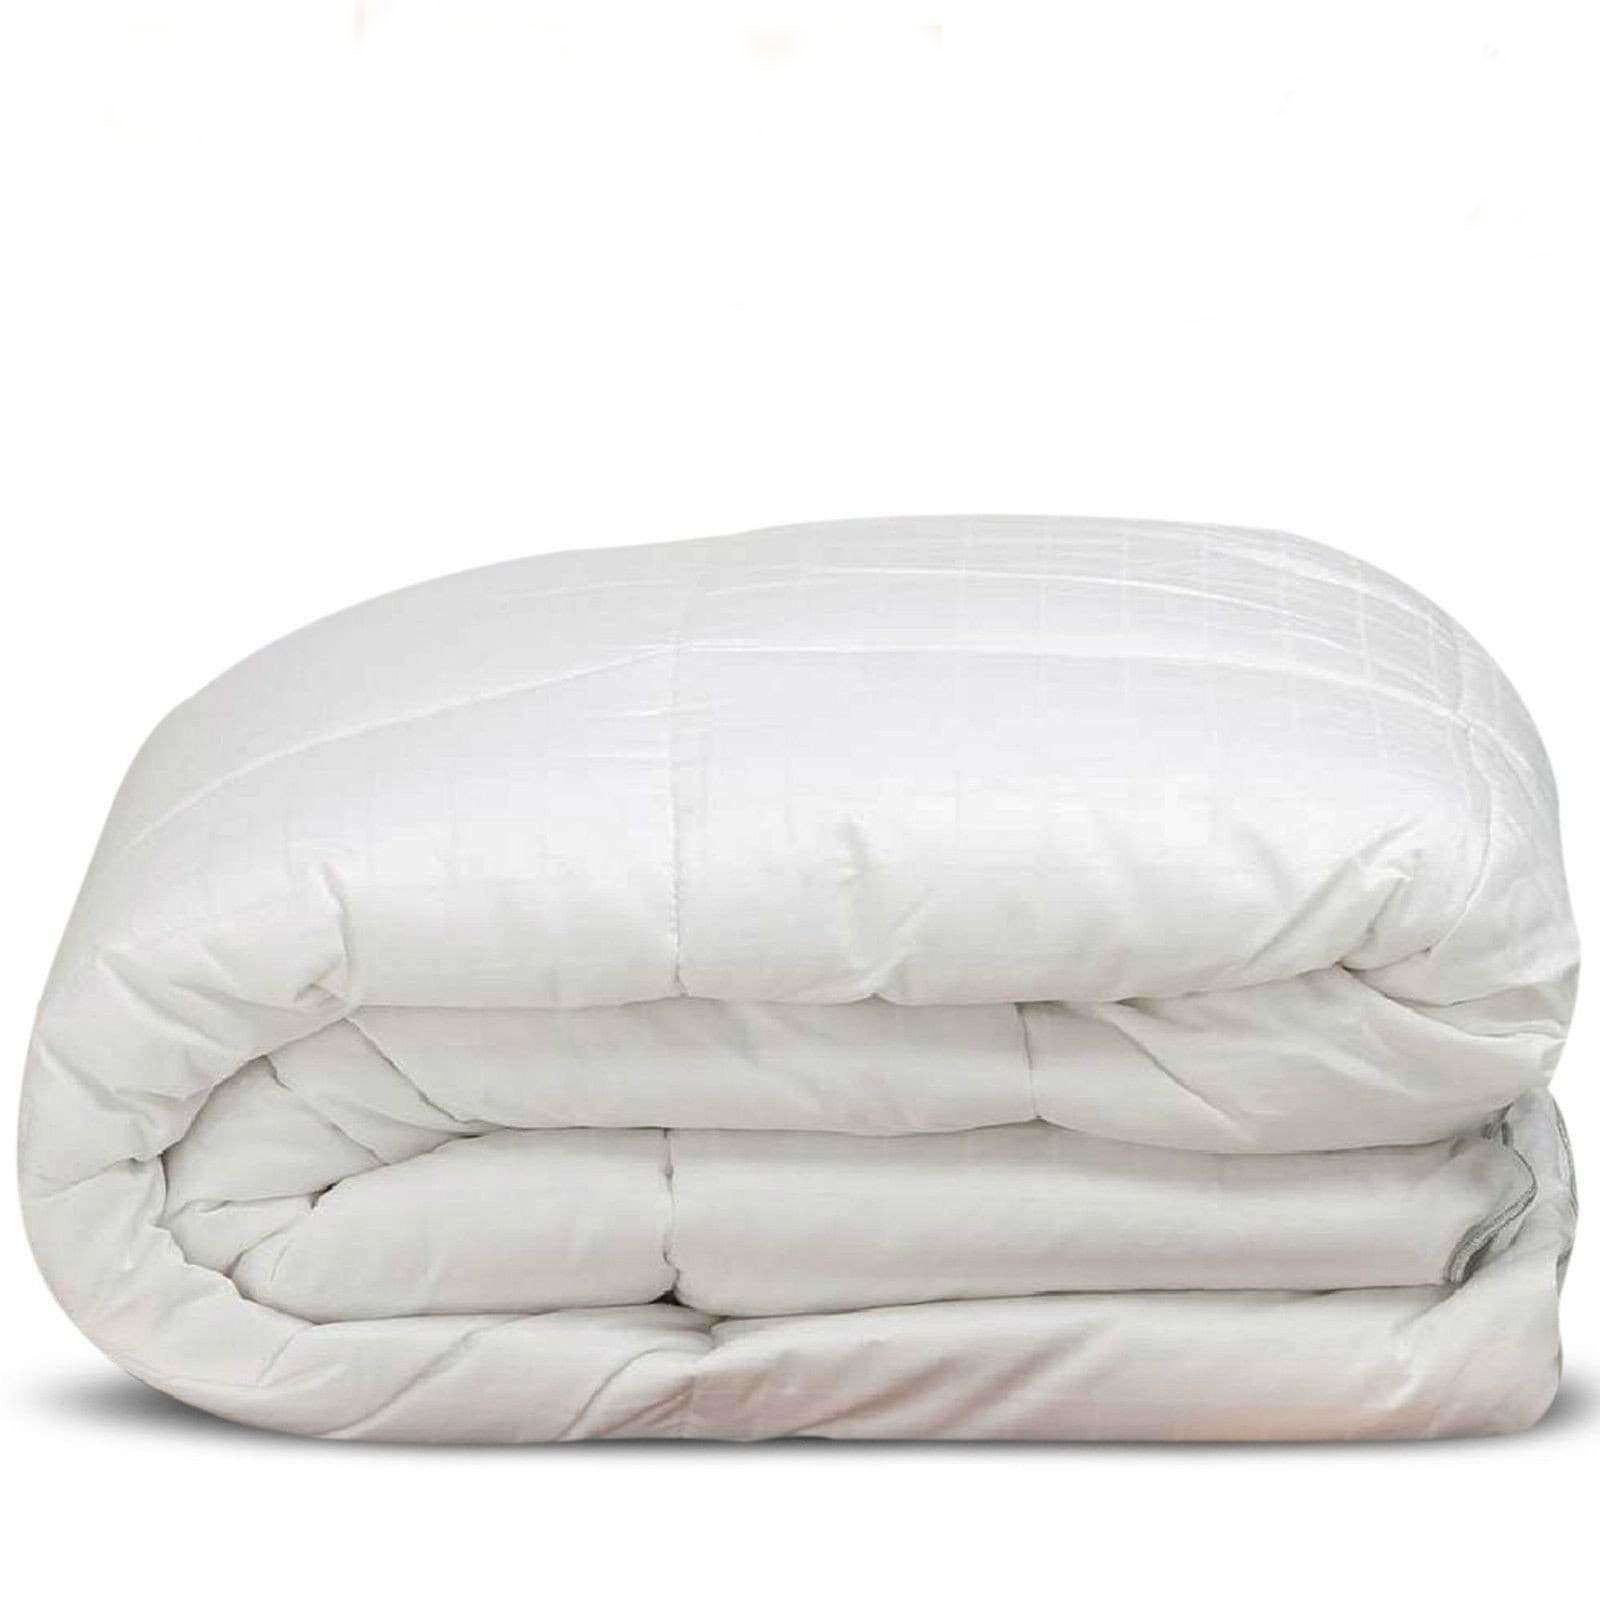 Merino Wool Duvet, Egyptian Cotton Cover, Double Bed